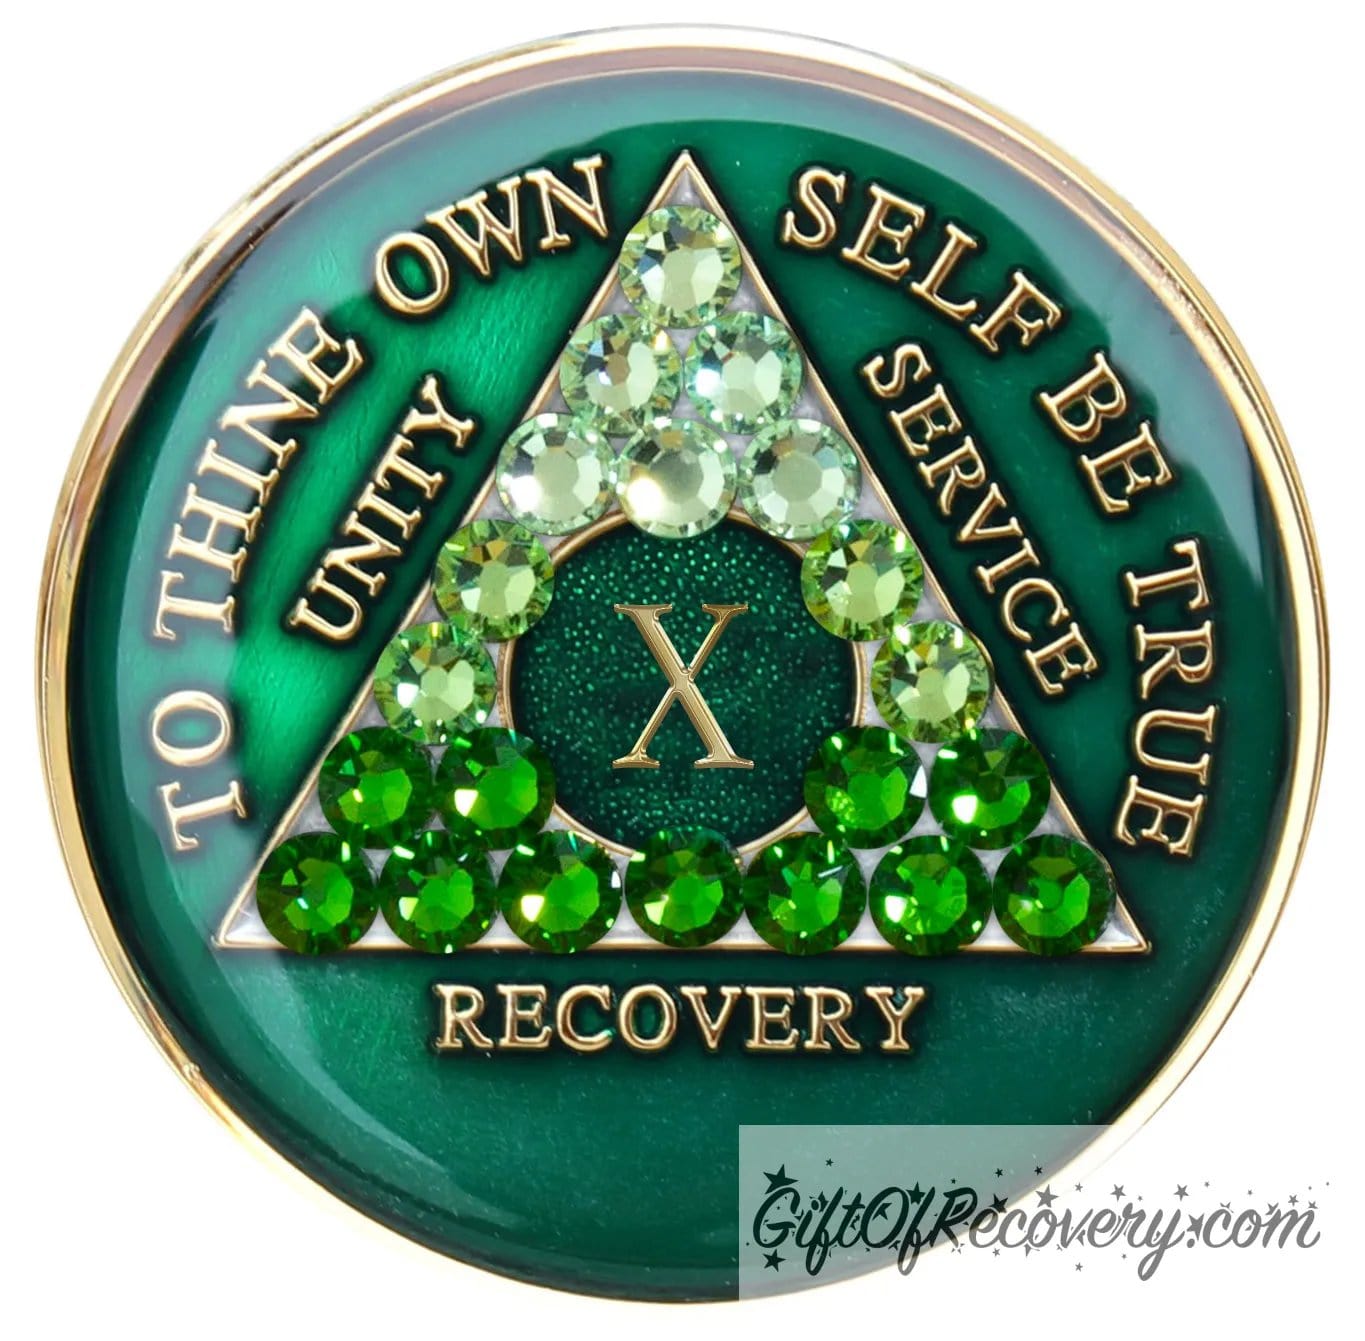 10 year AA medallion, emerald green with 21 genuine green crystals ranging from light to dark green in the shape of the triangle in the center to emphasize the transformation in the recovery journey, to thine own self be true, roman number, unity, service recovery are embossed in 14k gold-plated brass, the middle circle is sparkle green and the recovery medallion is sealed in resin for a shiny finish that lasts.